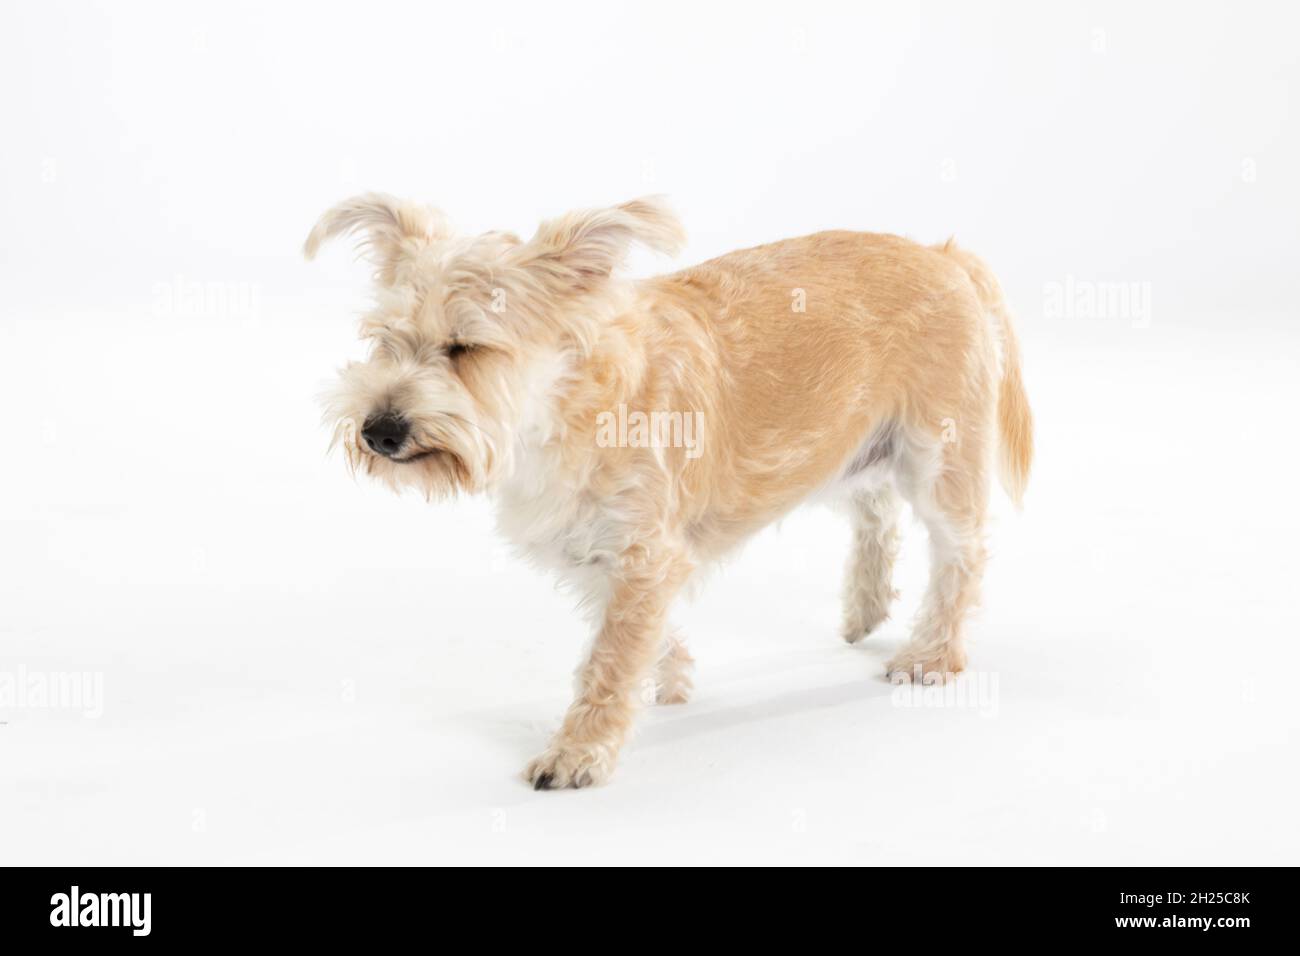 Multiracial small dog walks hesitantly against white background. Isolated from the background. Stock Photo